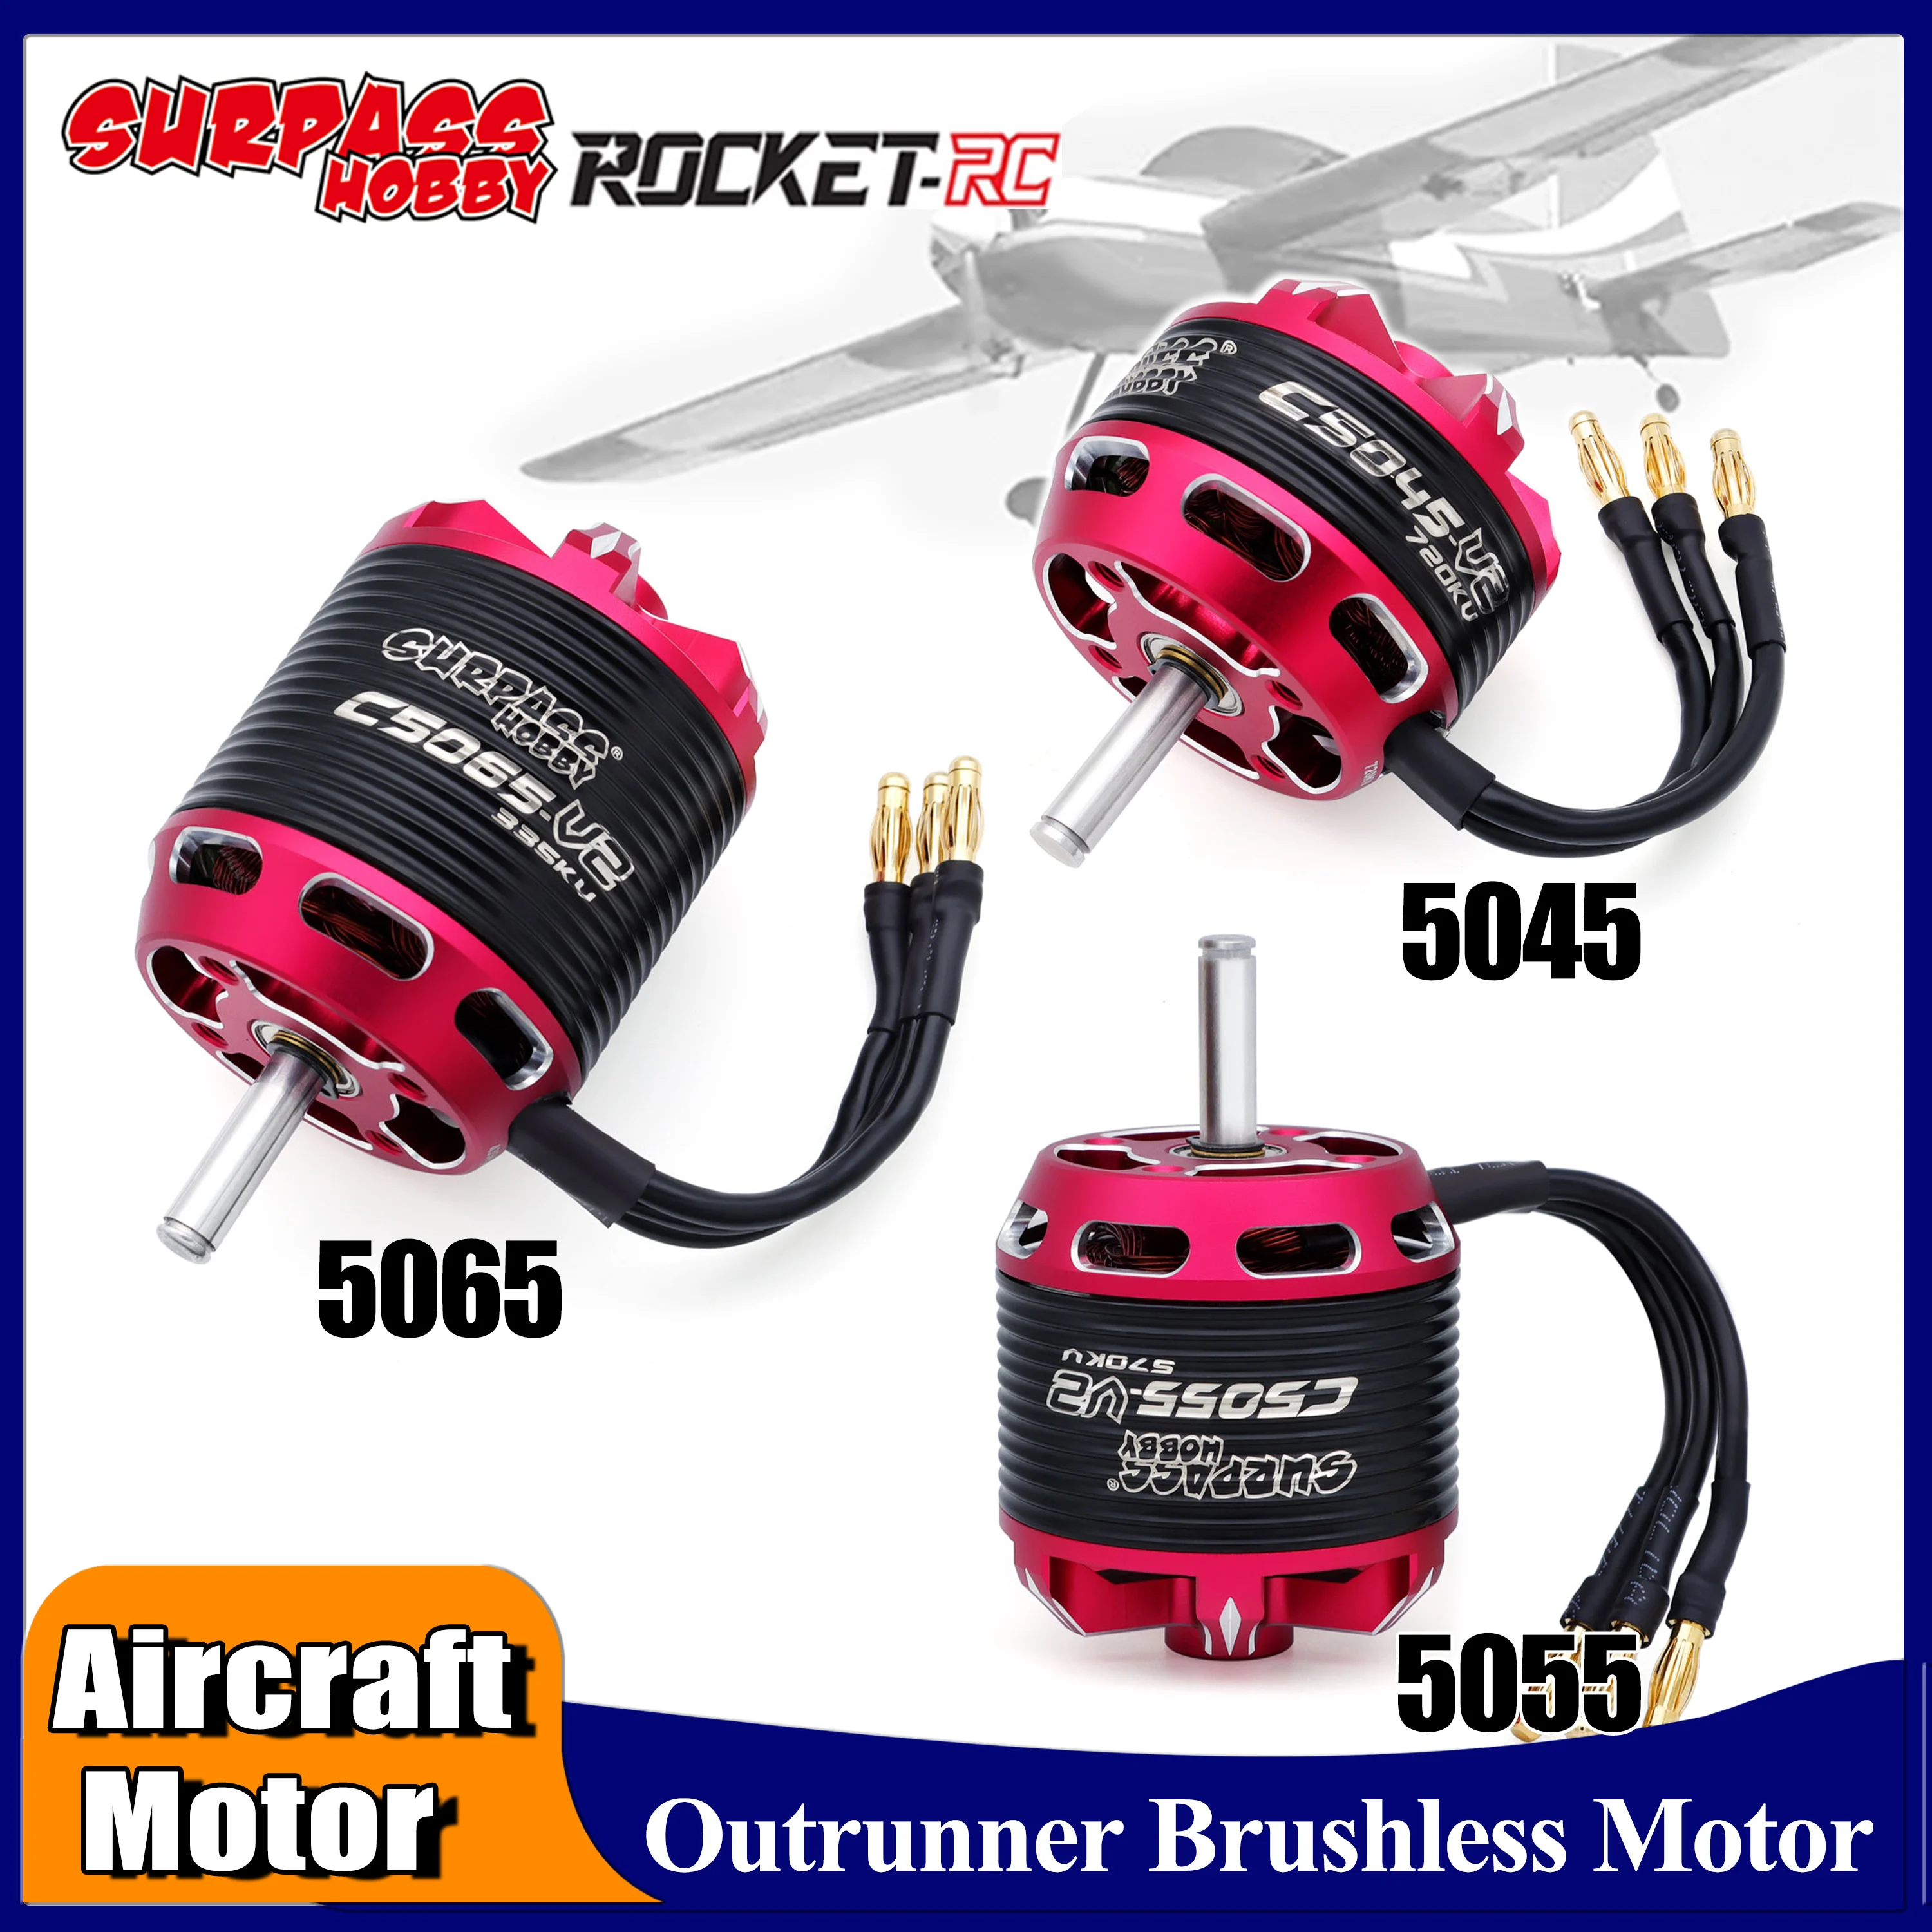 

SURPASS HOBBY 5045 5055 5065 V2 Outrunner Brushless Motor for RC Fixed-wing FPV Quadcopter Drone Plane F1 Airplane